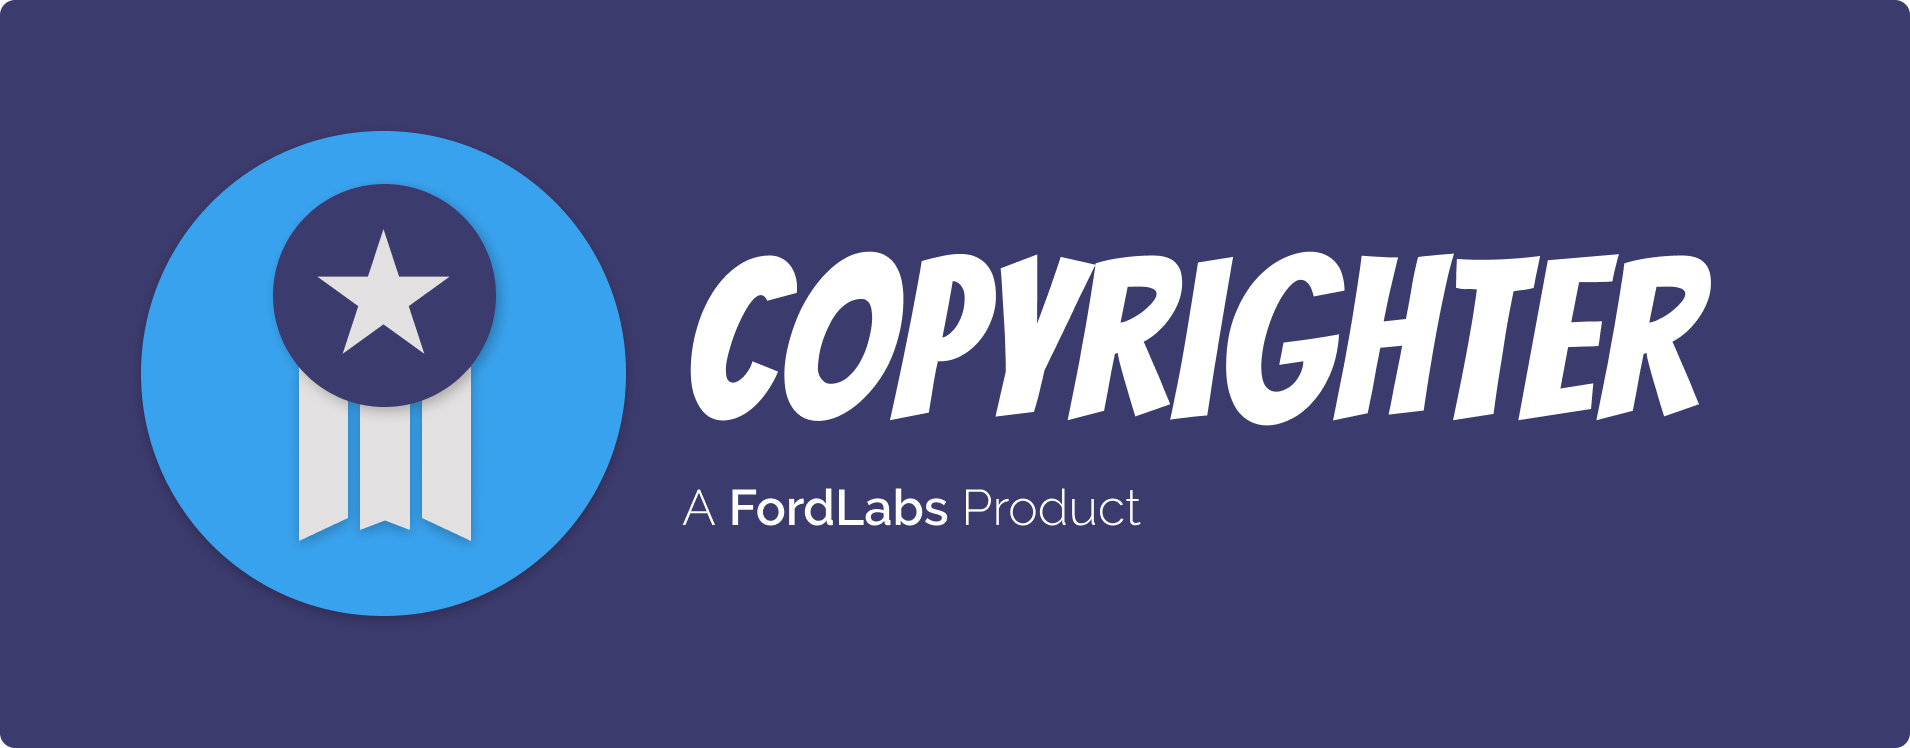 Writes your copyright so you don't have to